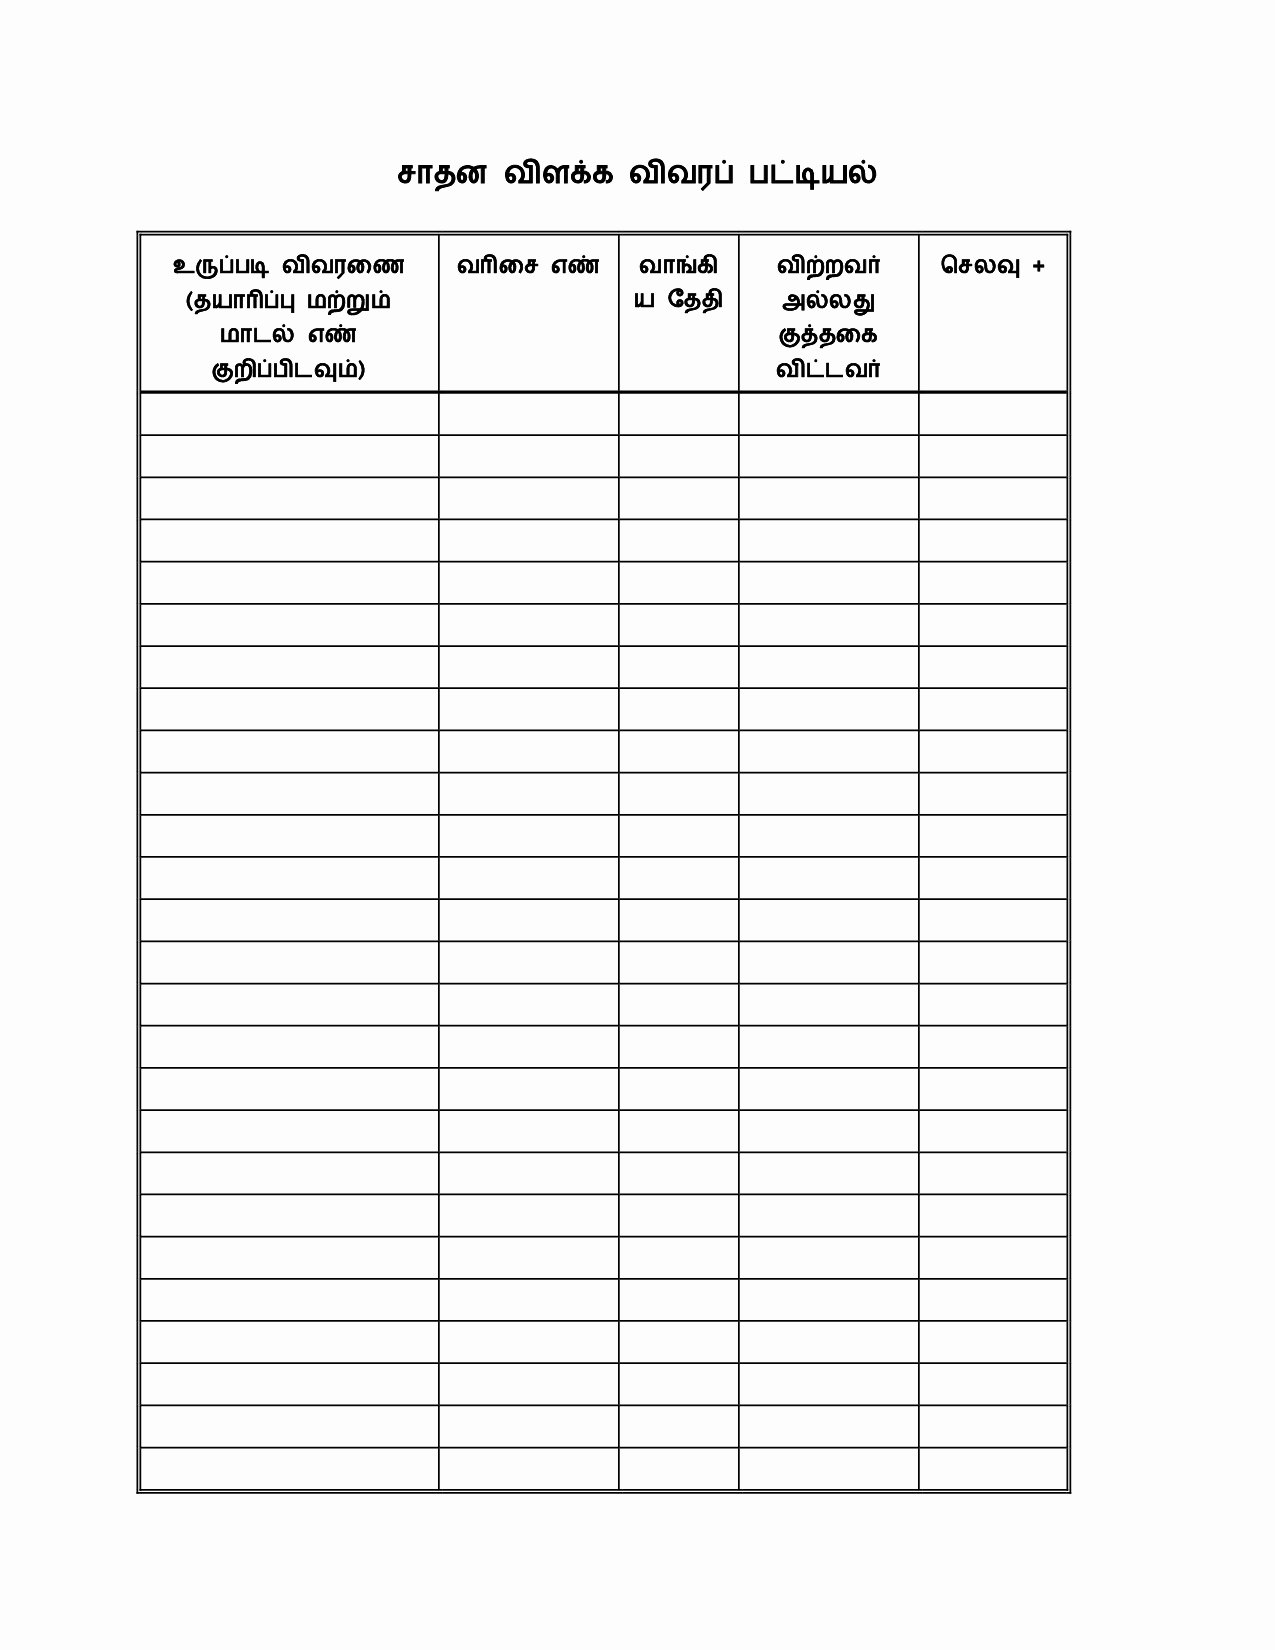 Chemical Inventory List Template Awesome Chemical Inventory List Template